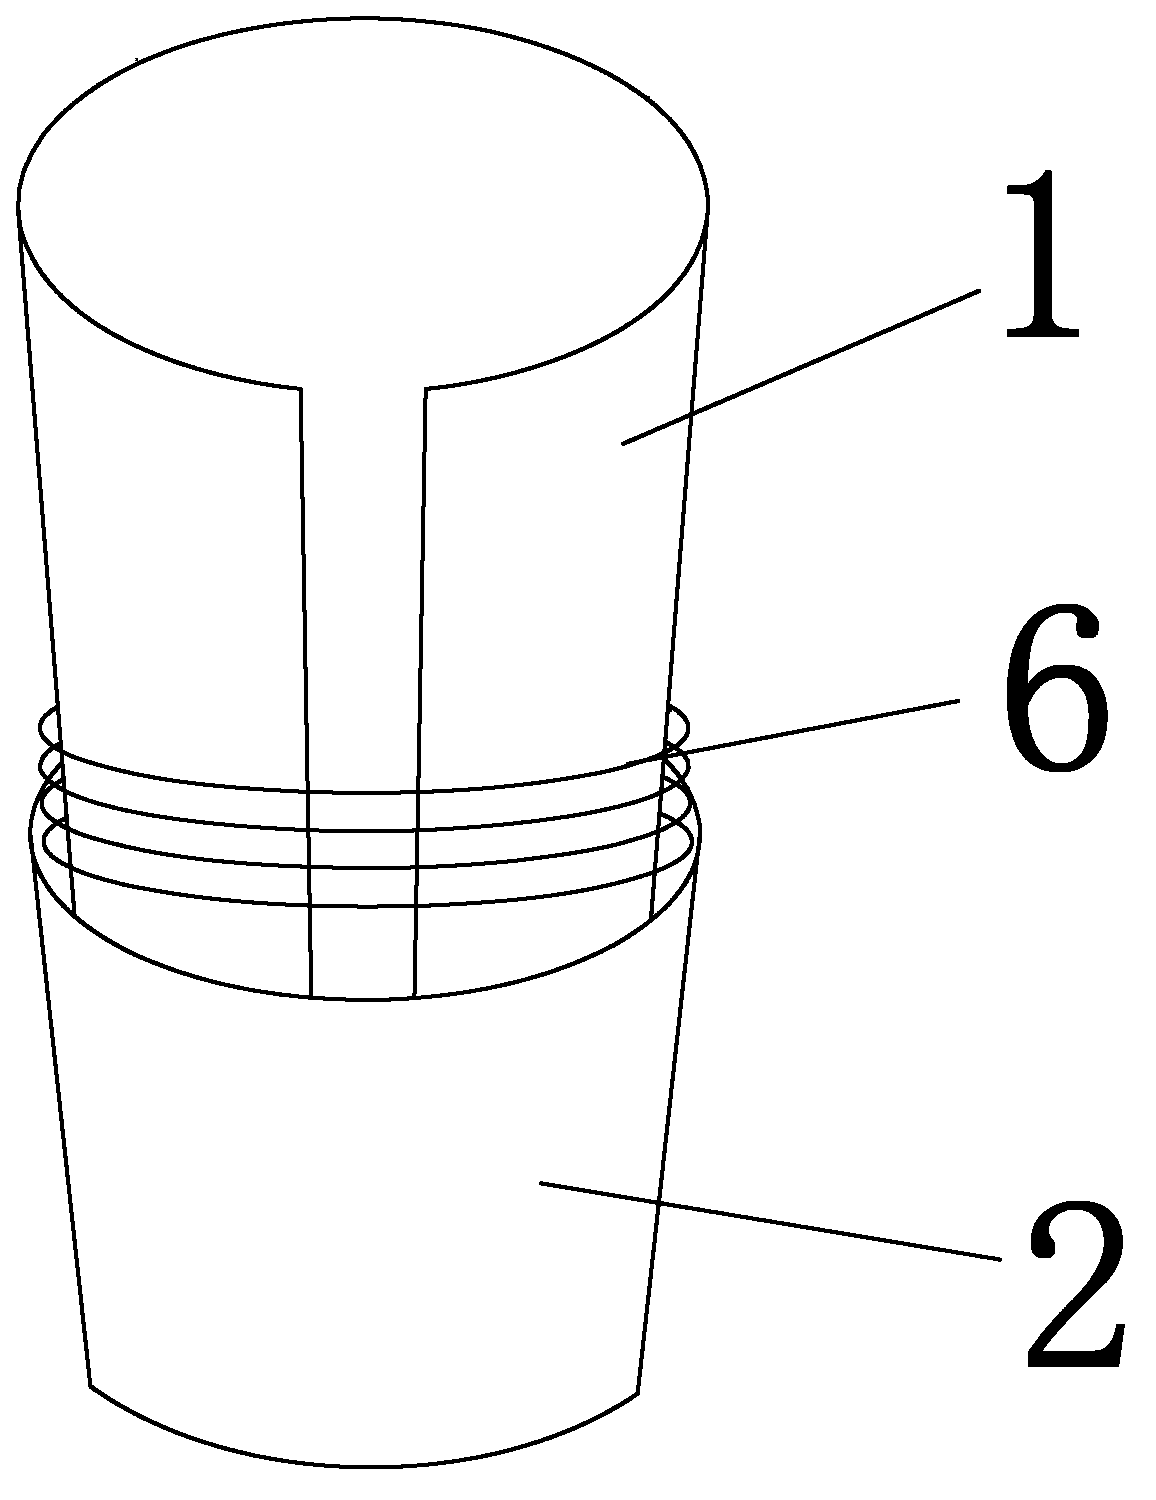 Tail loading device for swimming of laboratory mouse